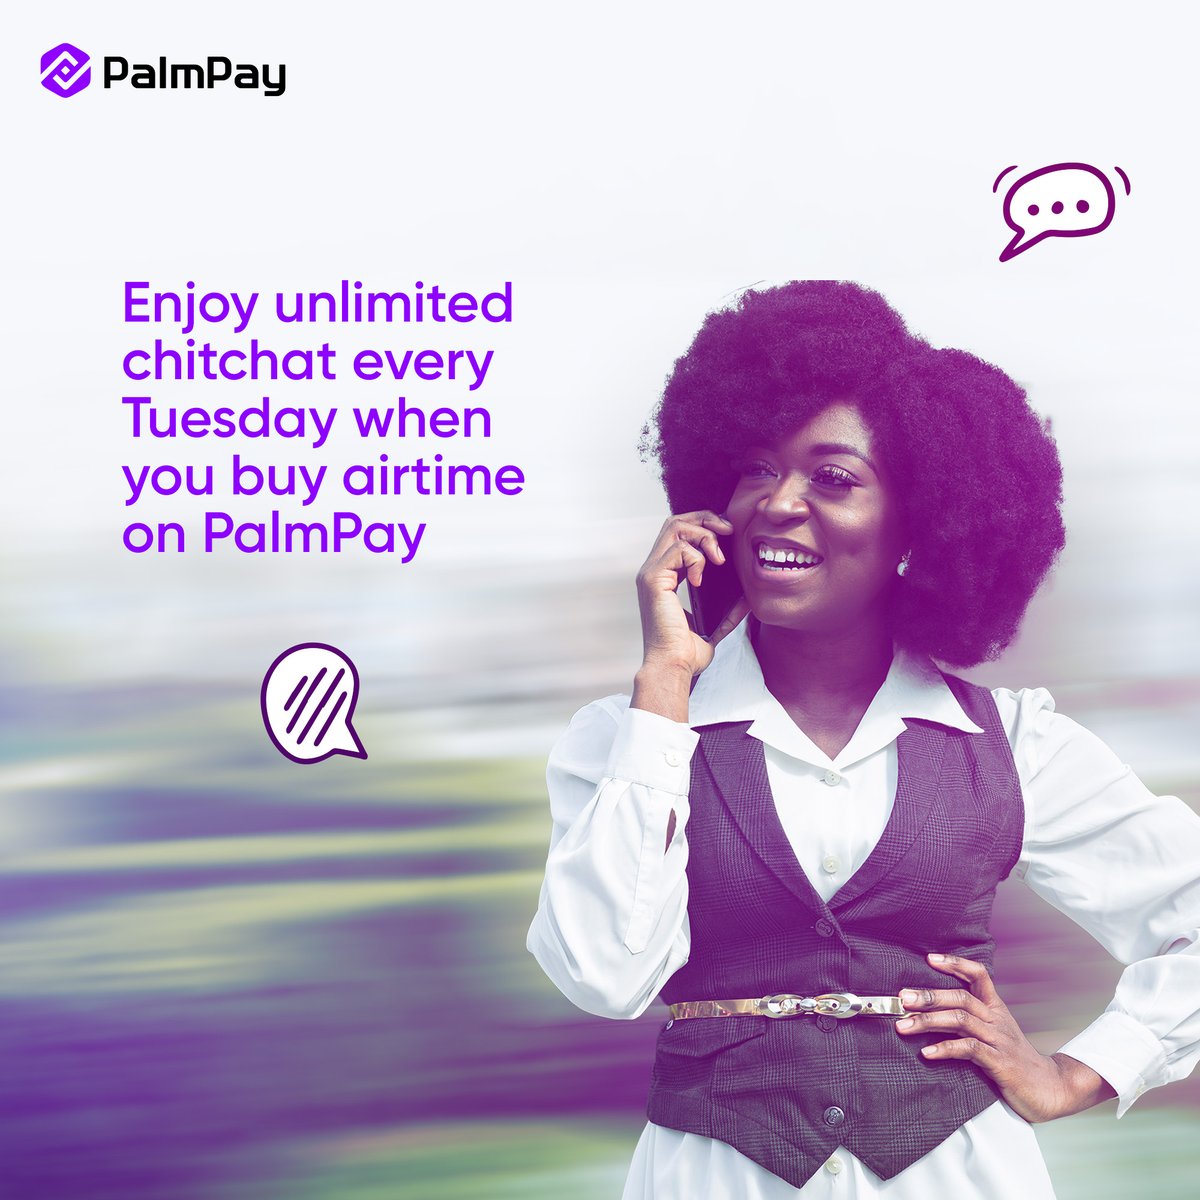 Stay connected for less EVERY WEEK! Get up to 20% off on airtime purchases every Tuesday with PalmPay. Start now: bit.ly/DownloadPalmPay #PalmPay